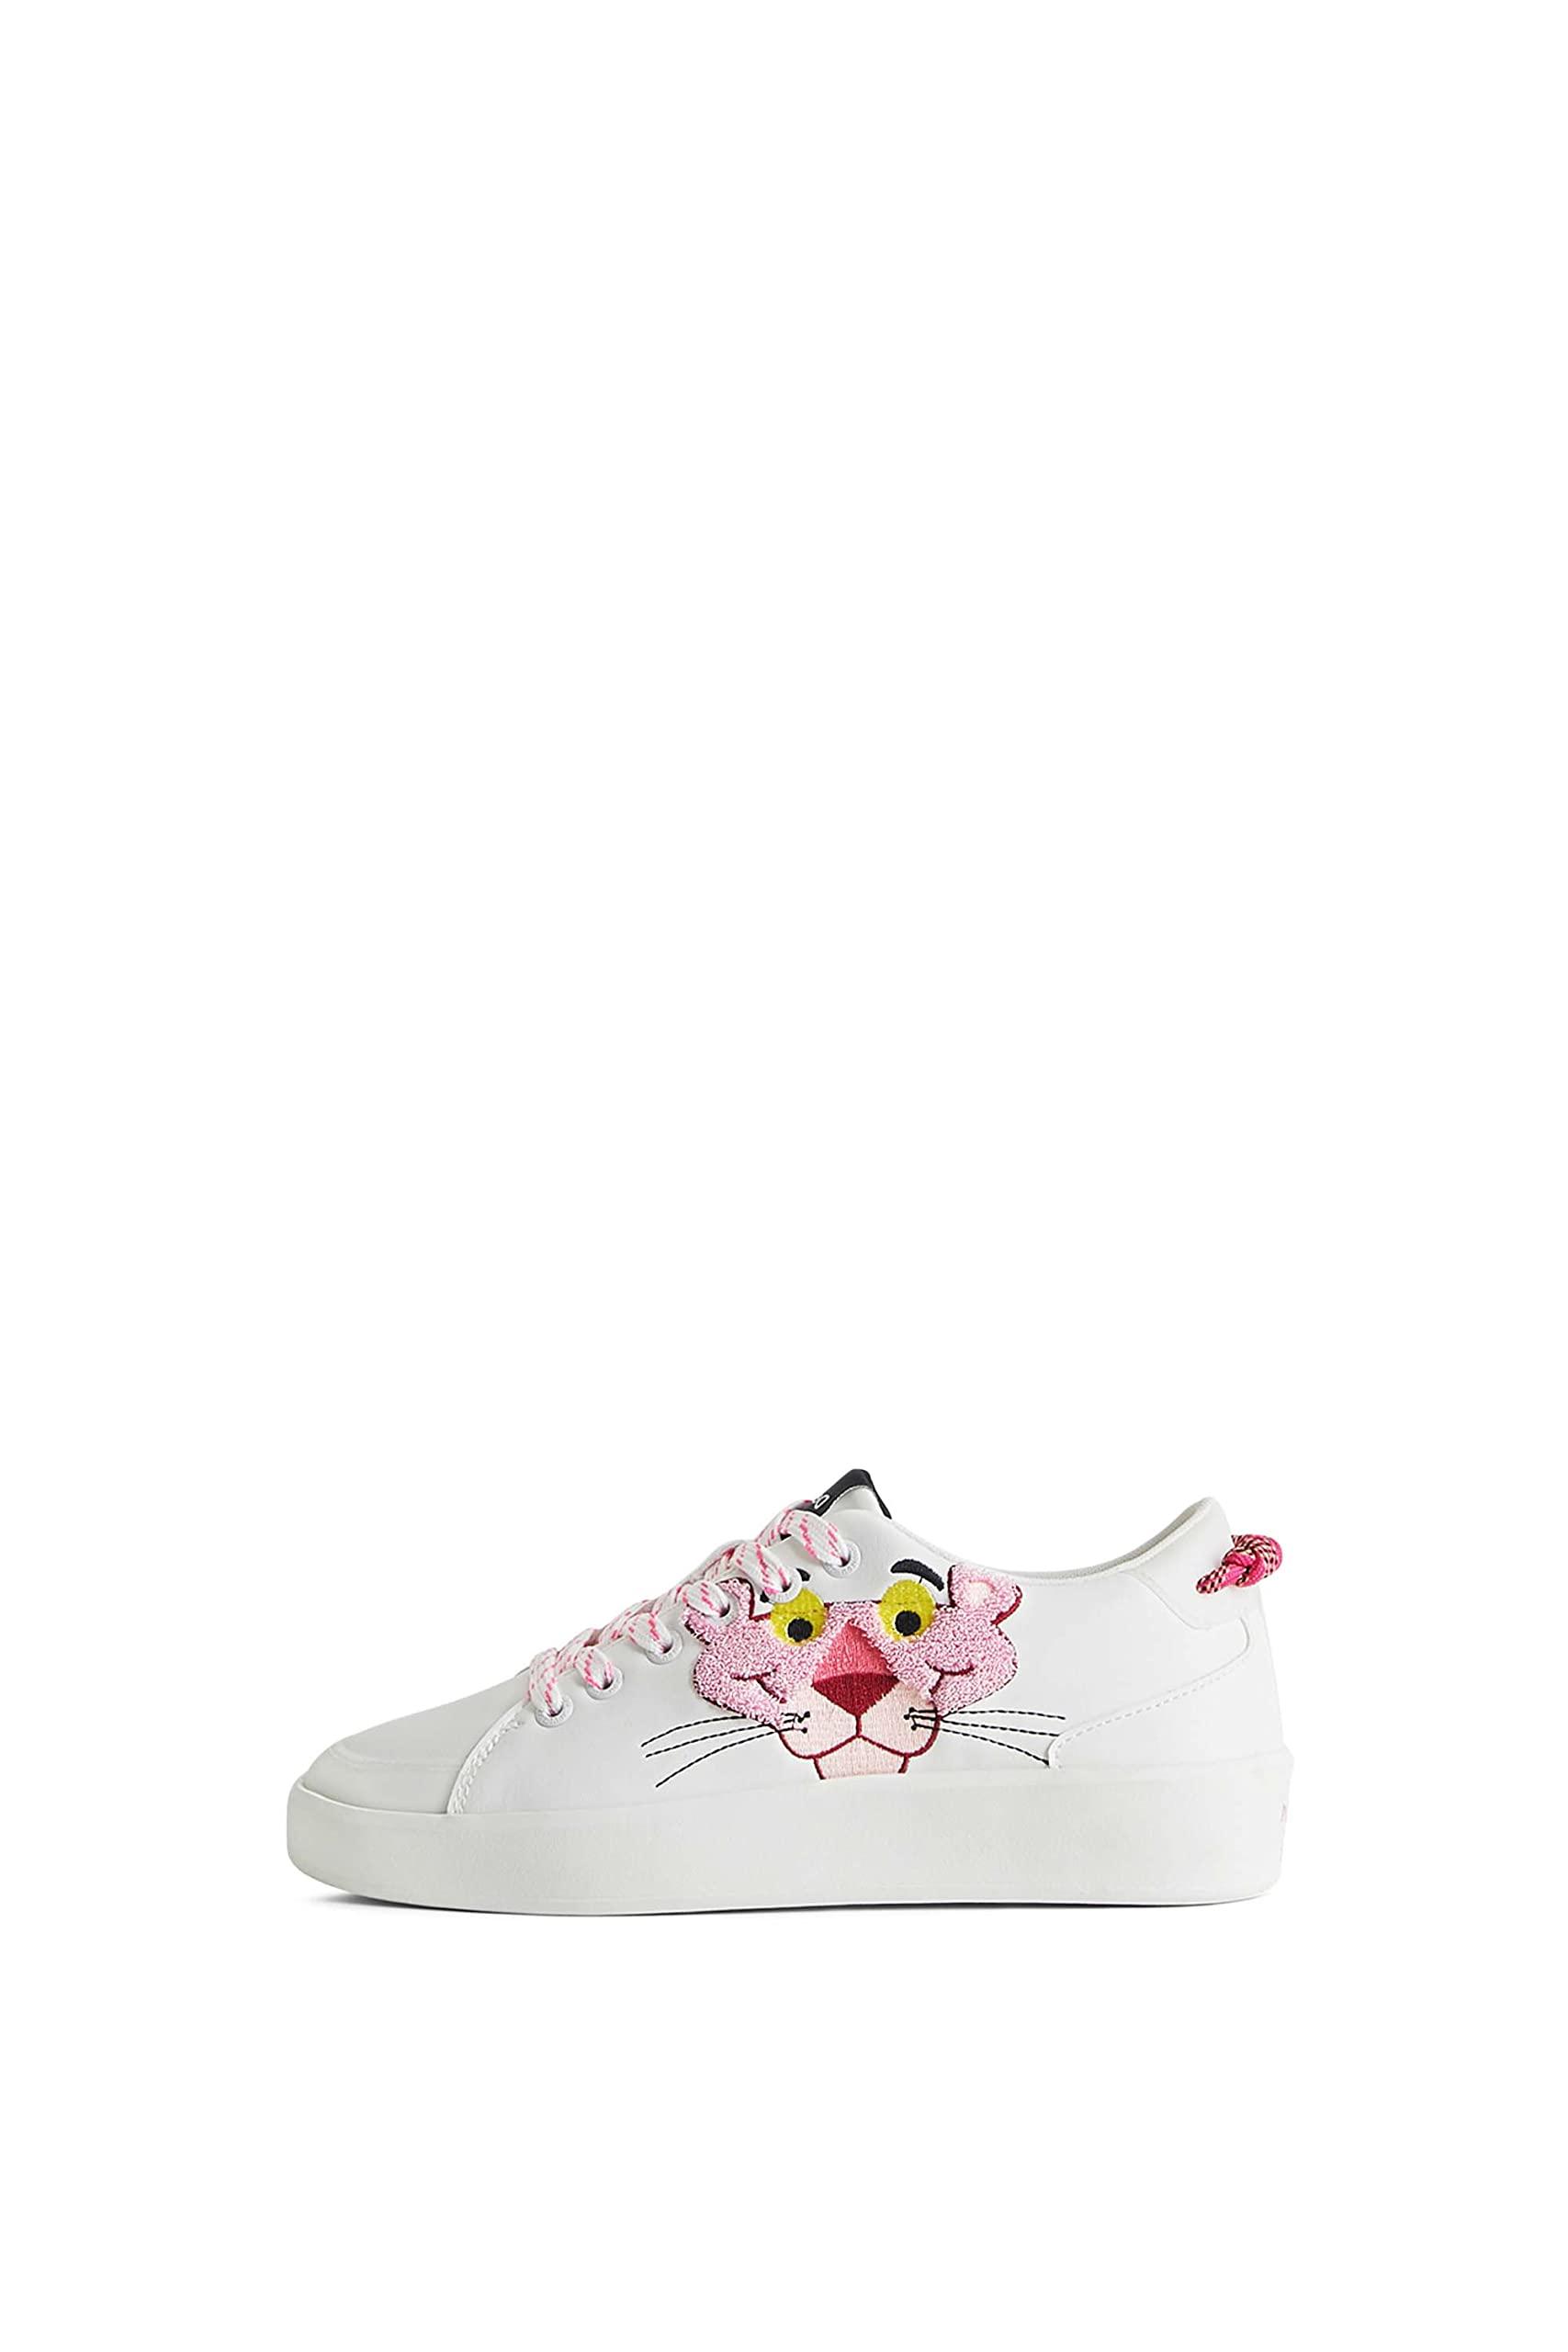 Desigual Shoes_fancy_pink Panther 1000 White Sneaker | Lyst